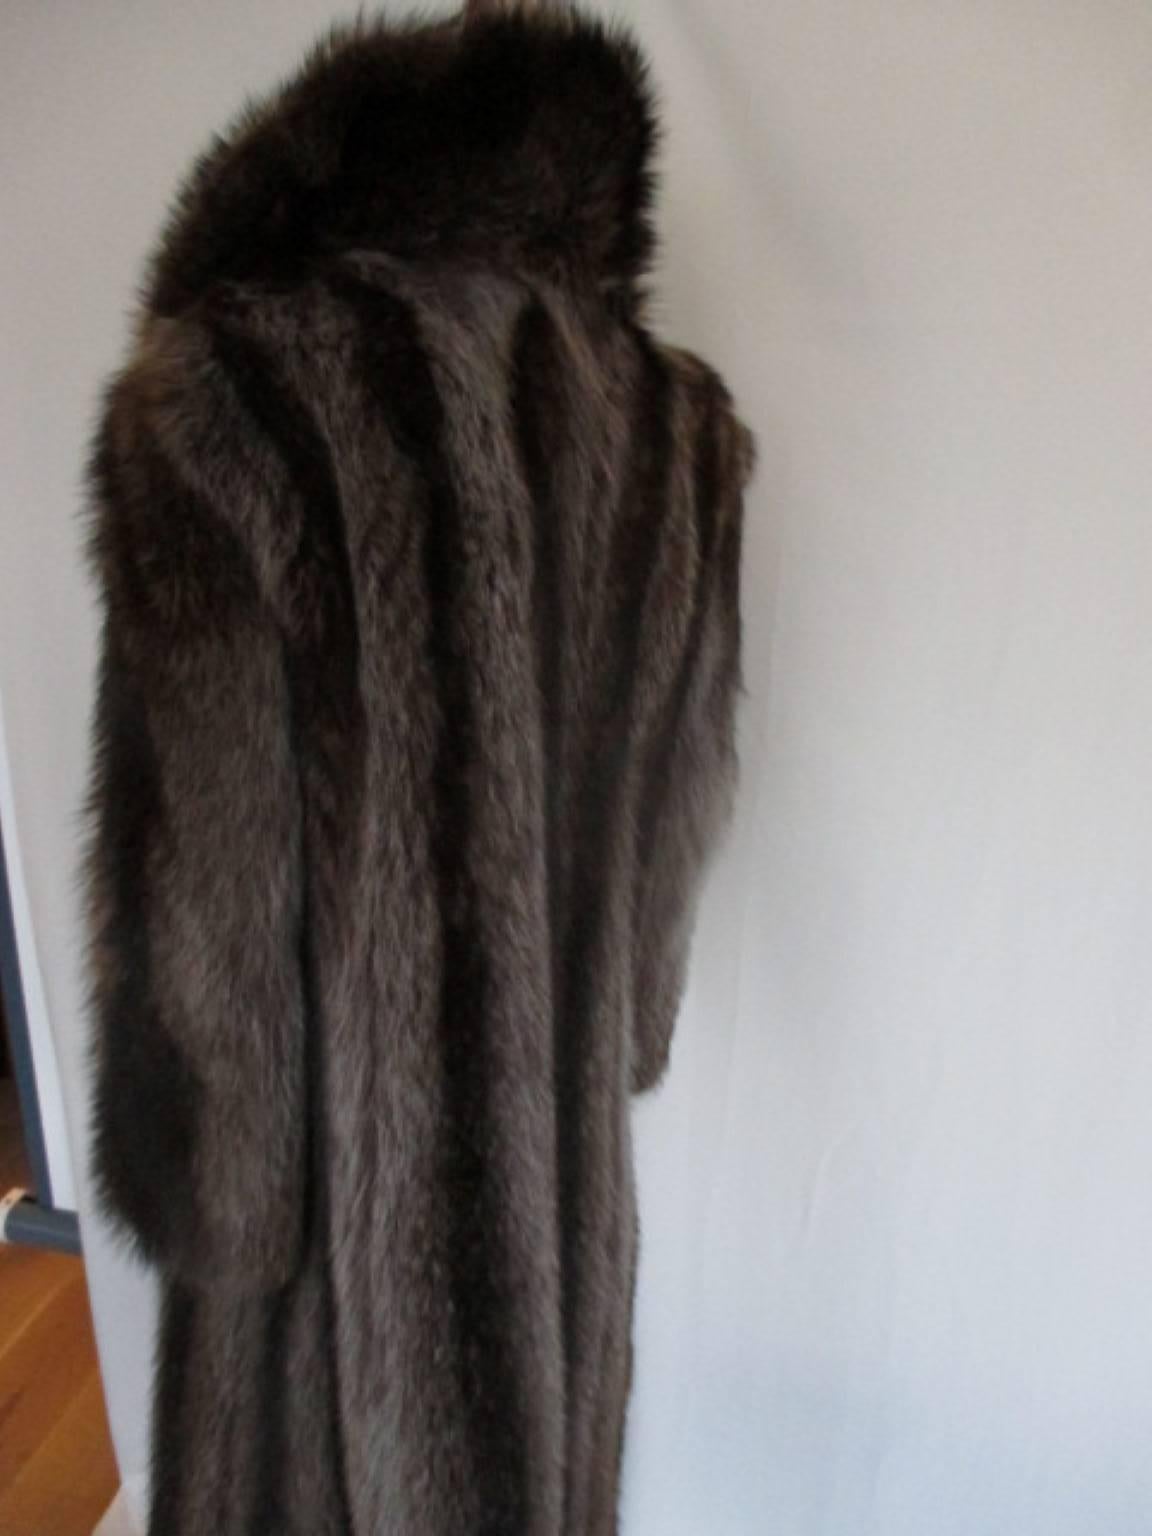 This vintage raccoon fur coat has 4 buttons.
The closing is reinforced with leather and has 2 velvet lined pockets.
Size fits like a medium eu 40/42